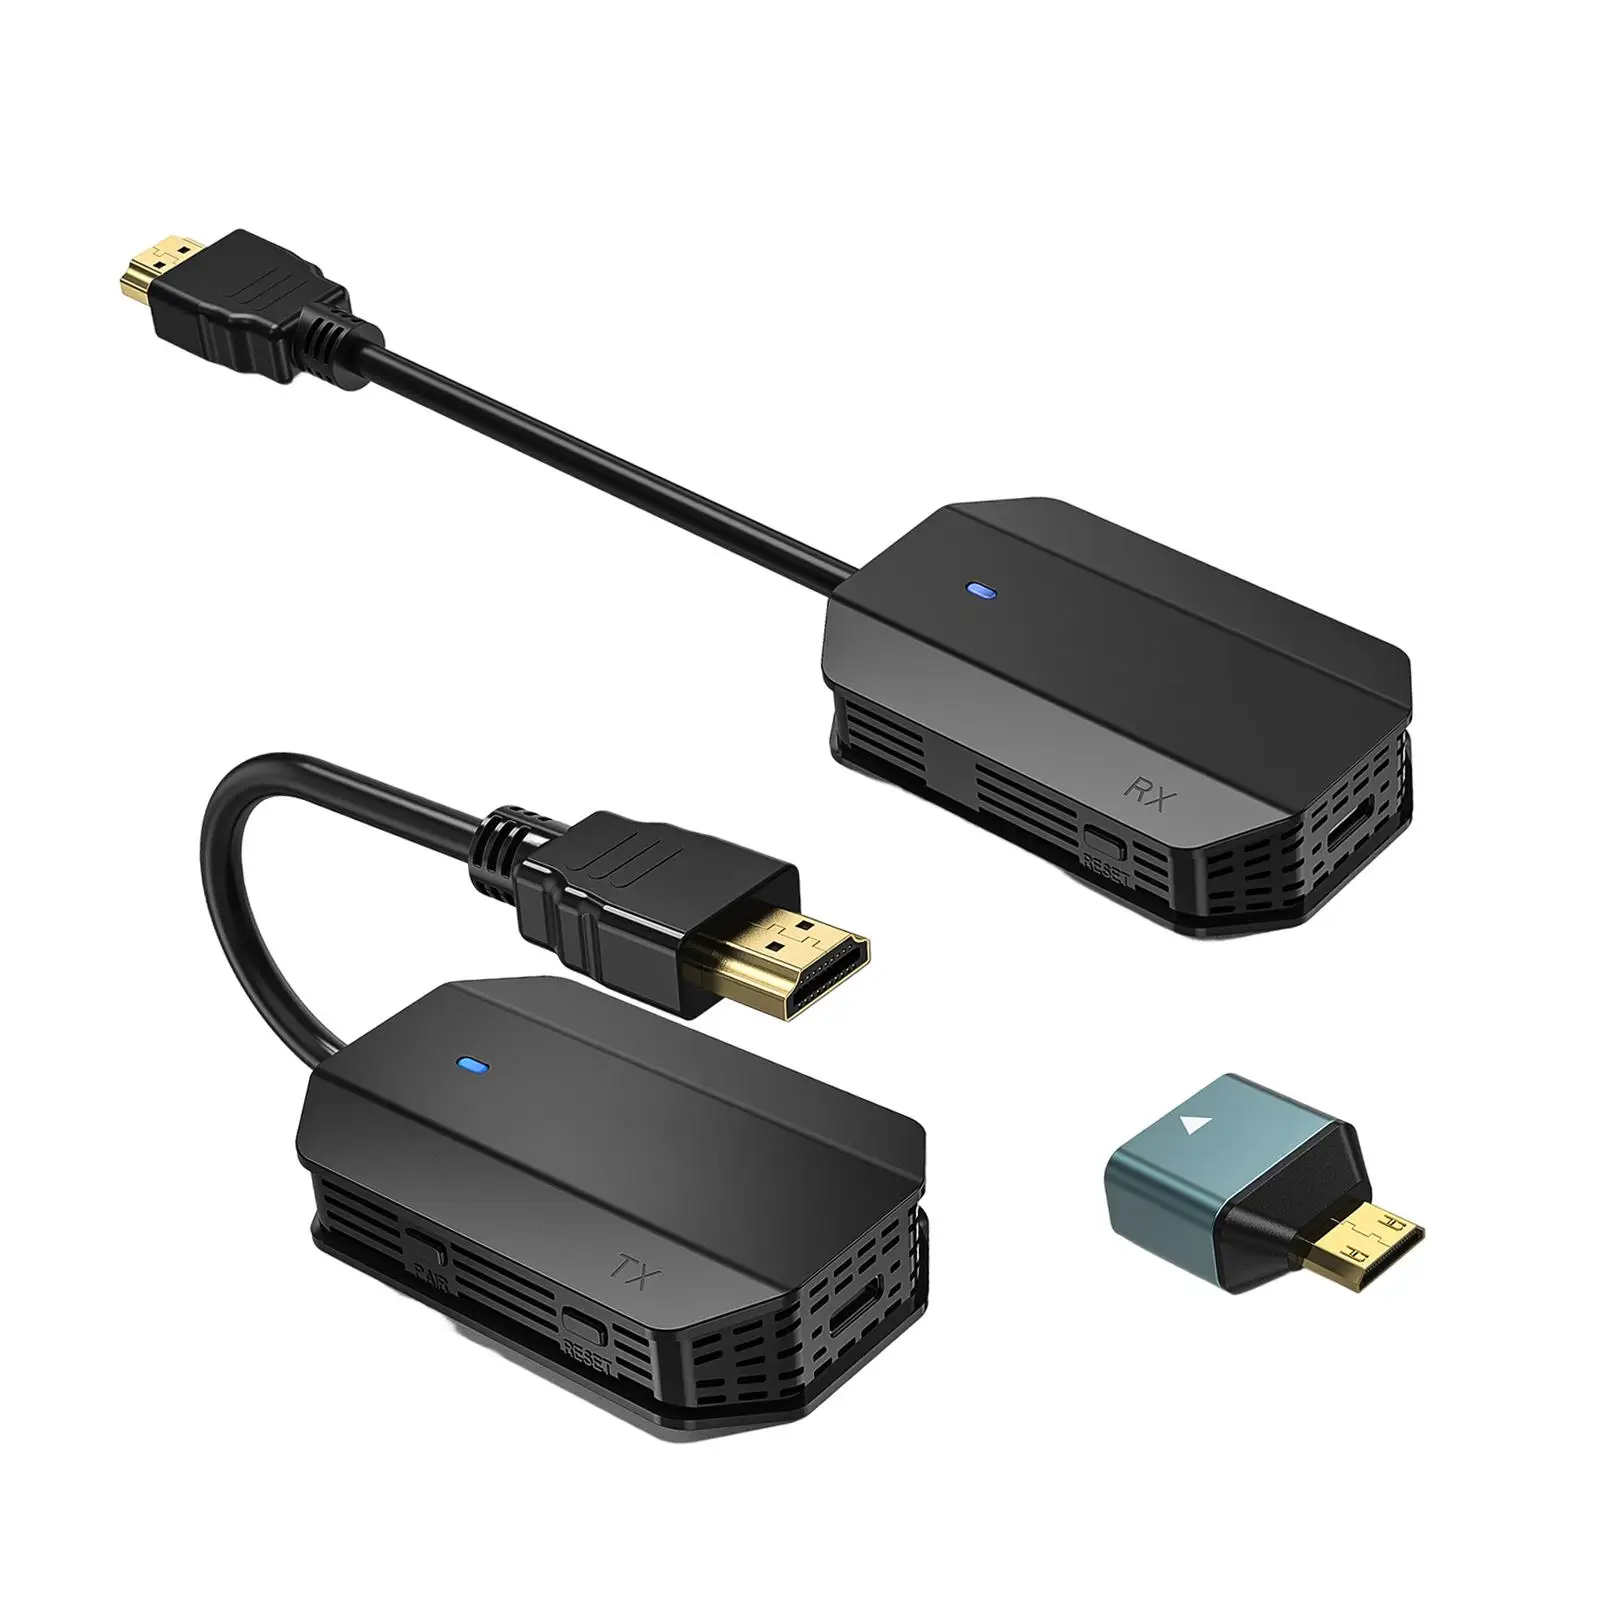 HDMI Transmitter and Receiver Portable HDMI Wireless Video Sharing Device HDMI Adapter for Laptop Camera Projector HDTV